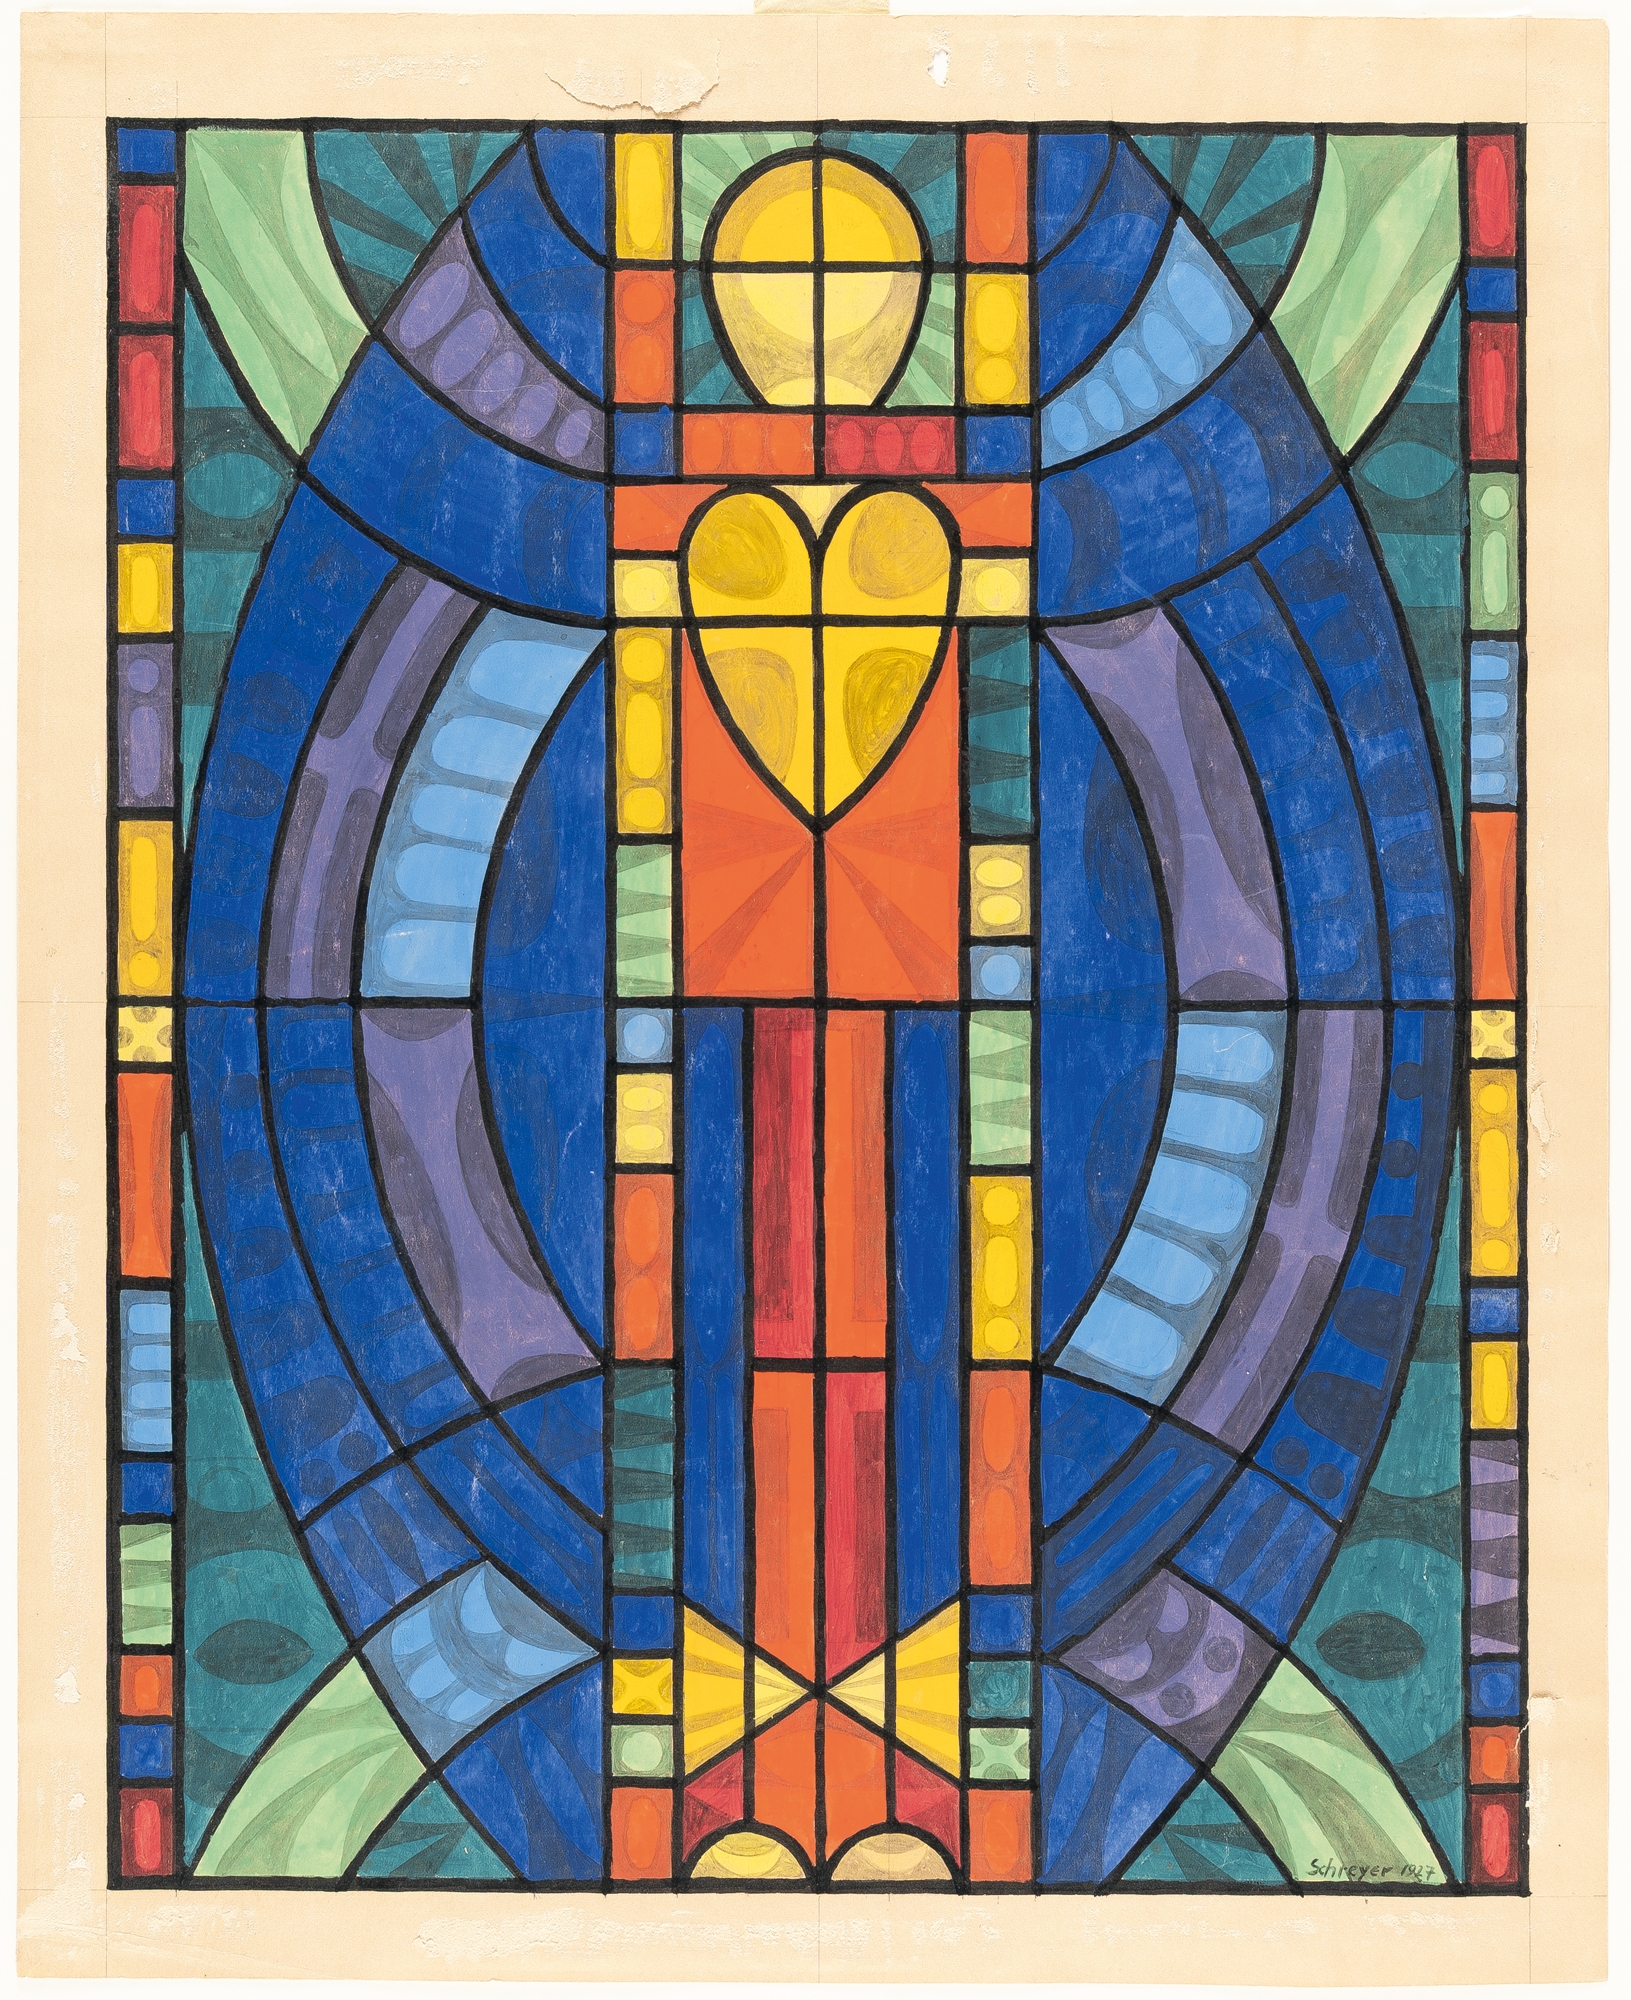 Artwork by Lothar Schreyer, Design for a stained glass window (oval), Made of Gouache, Indian ink, and pencil on cream wove